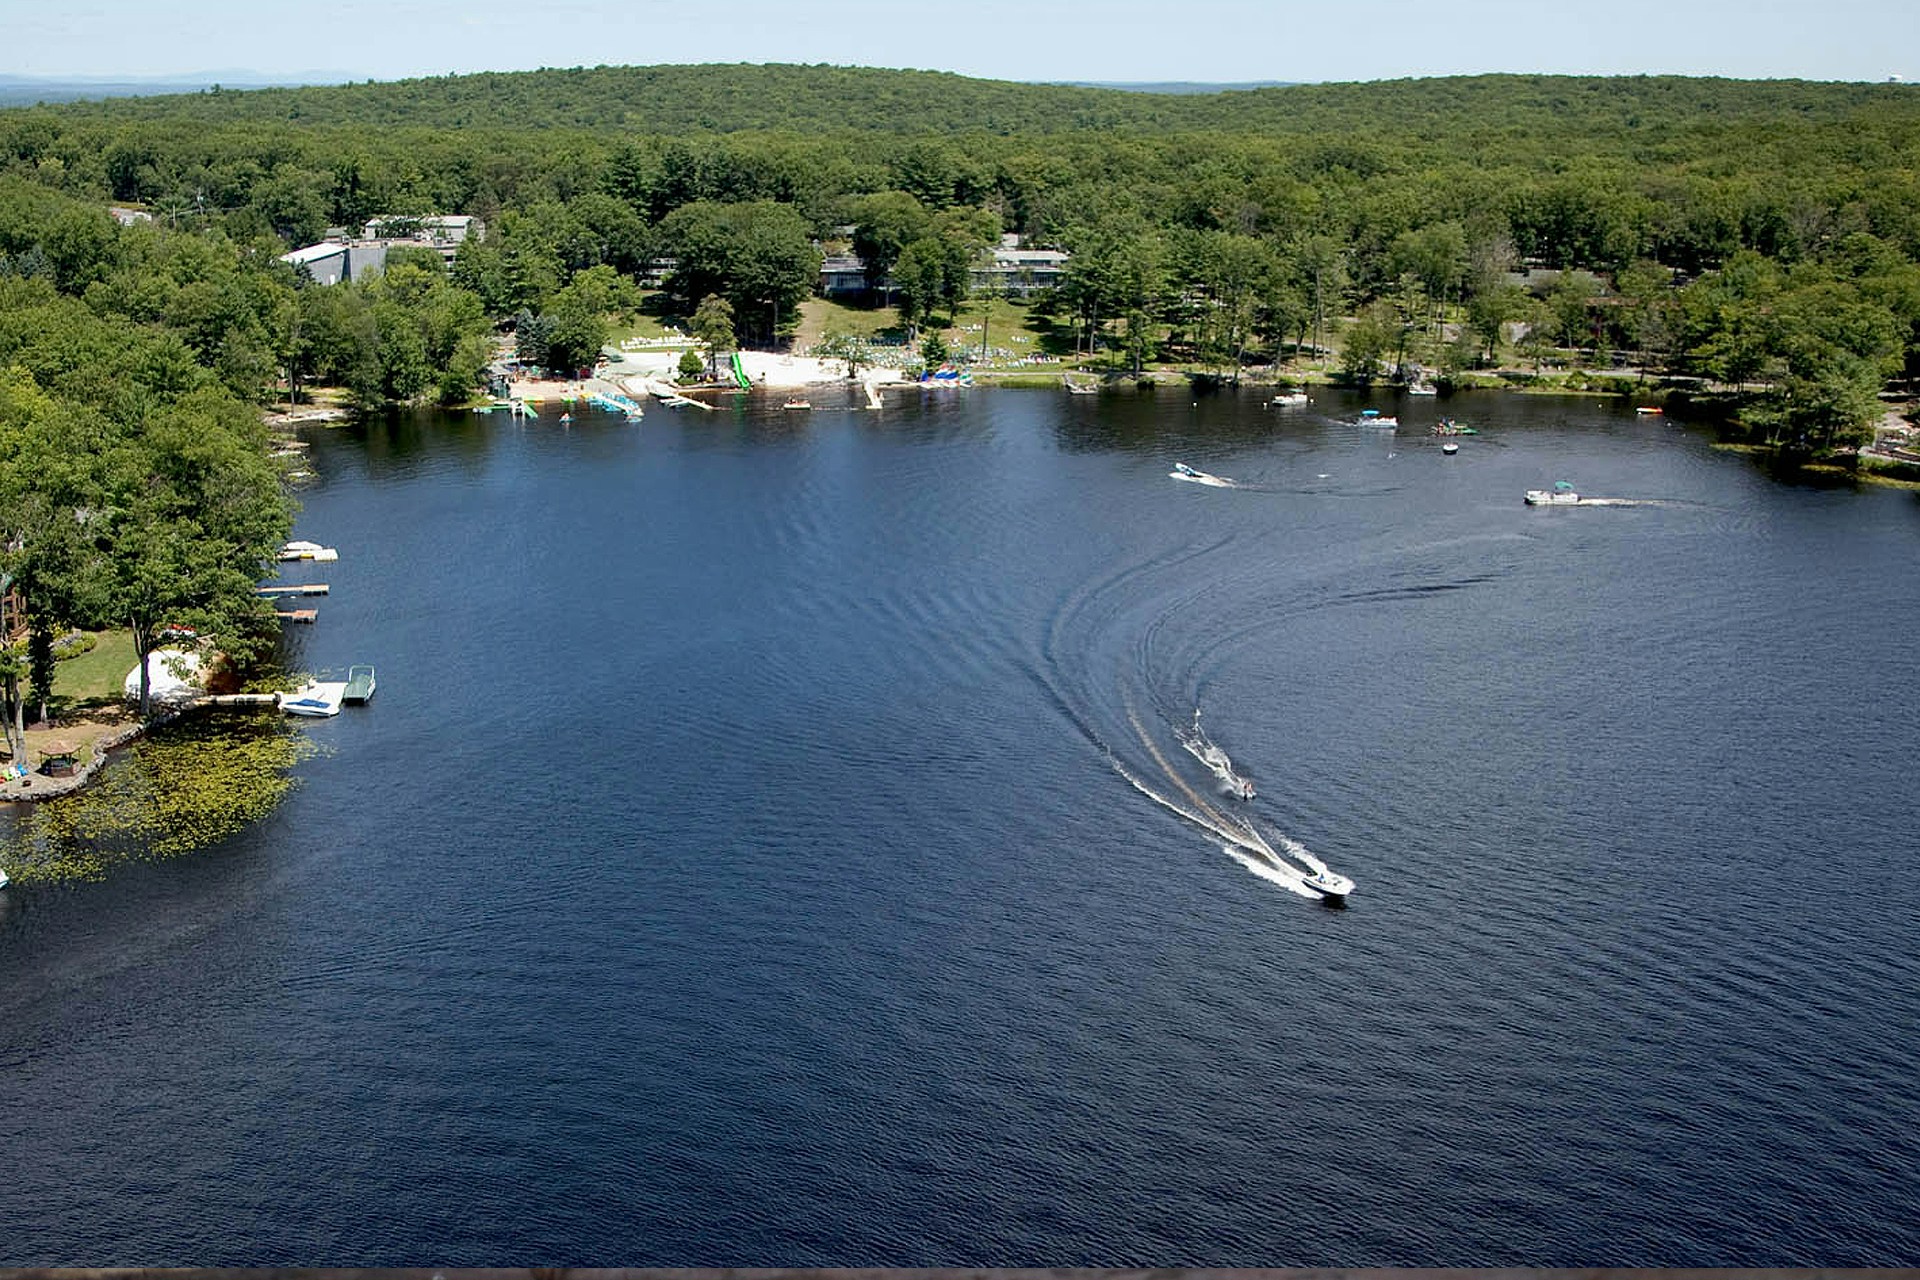 A boat drives across a lake in the Pocono Mountains in this image for a Meltwater customer story for Woodloch Resort.